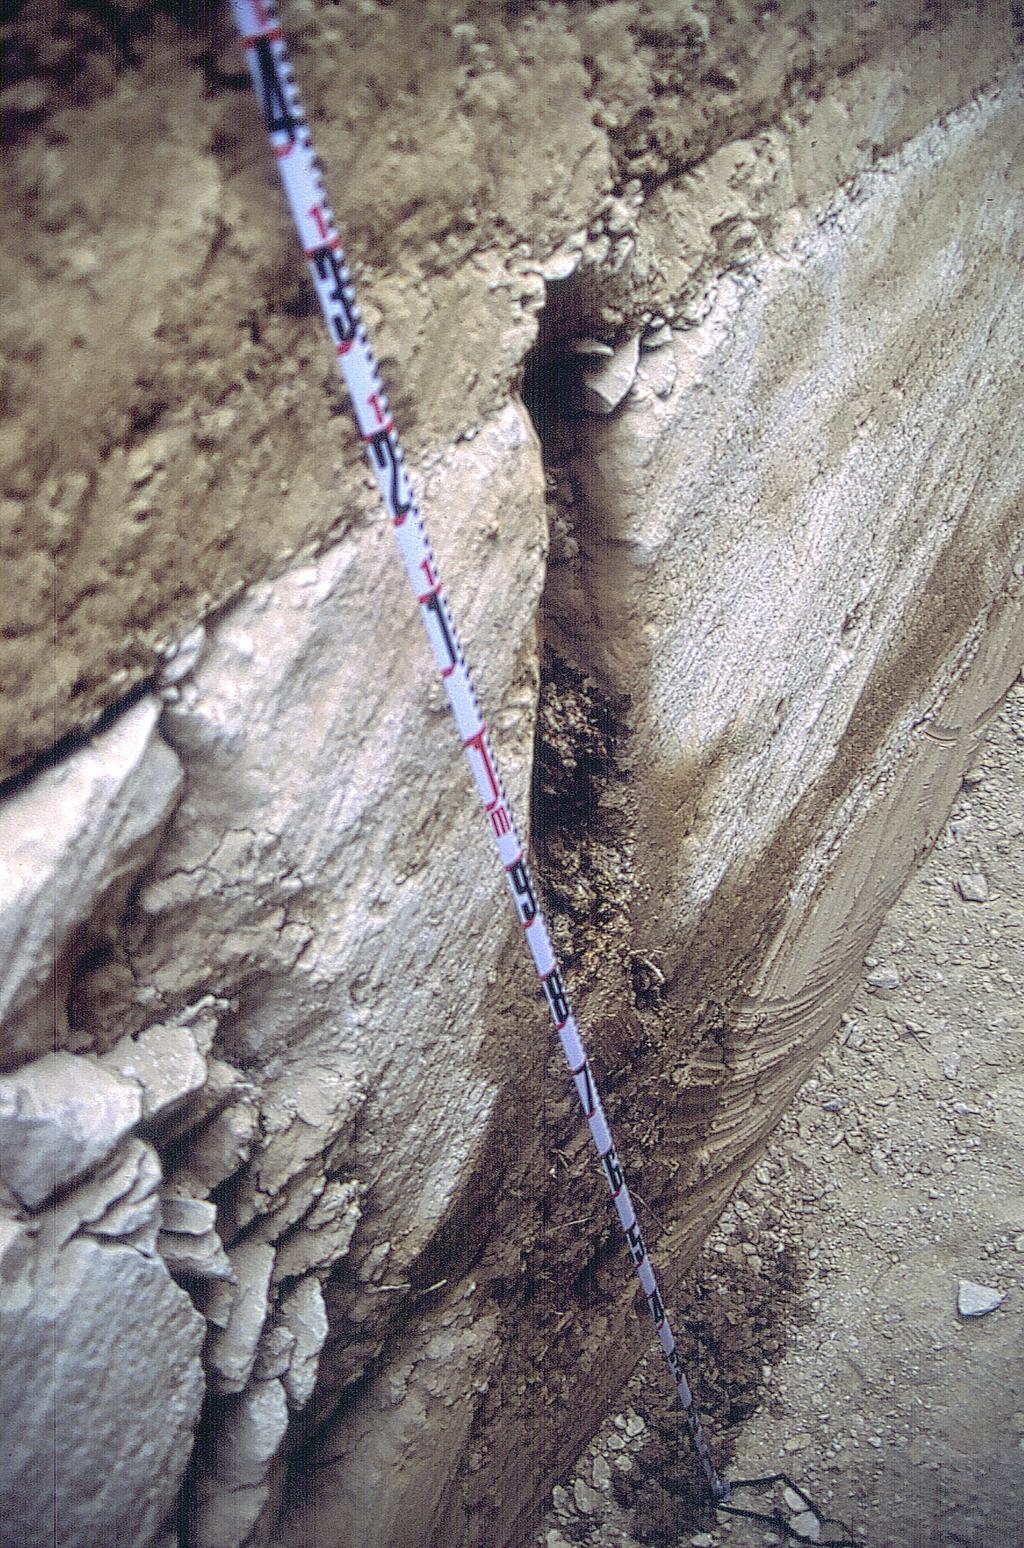 together make up the foundation and floor supports. While the total depth of the foundation was not observed, it probably does not extend to the lower limestone shown in Figure 2.